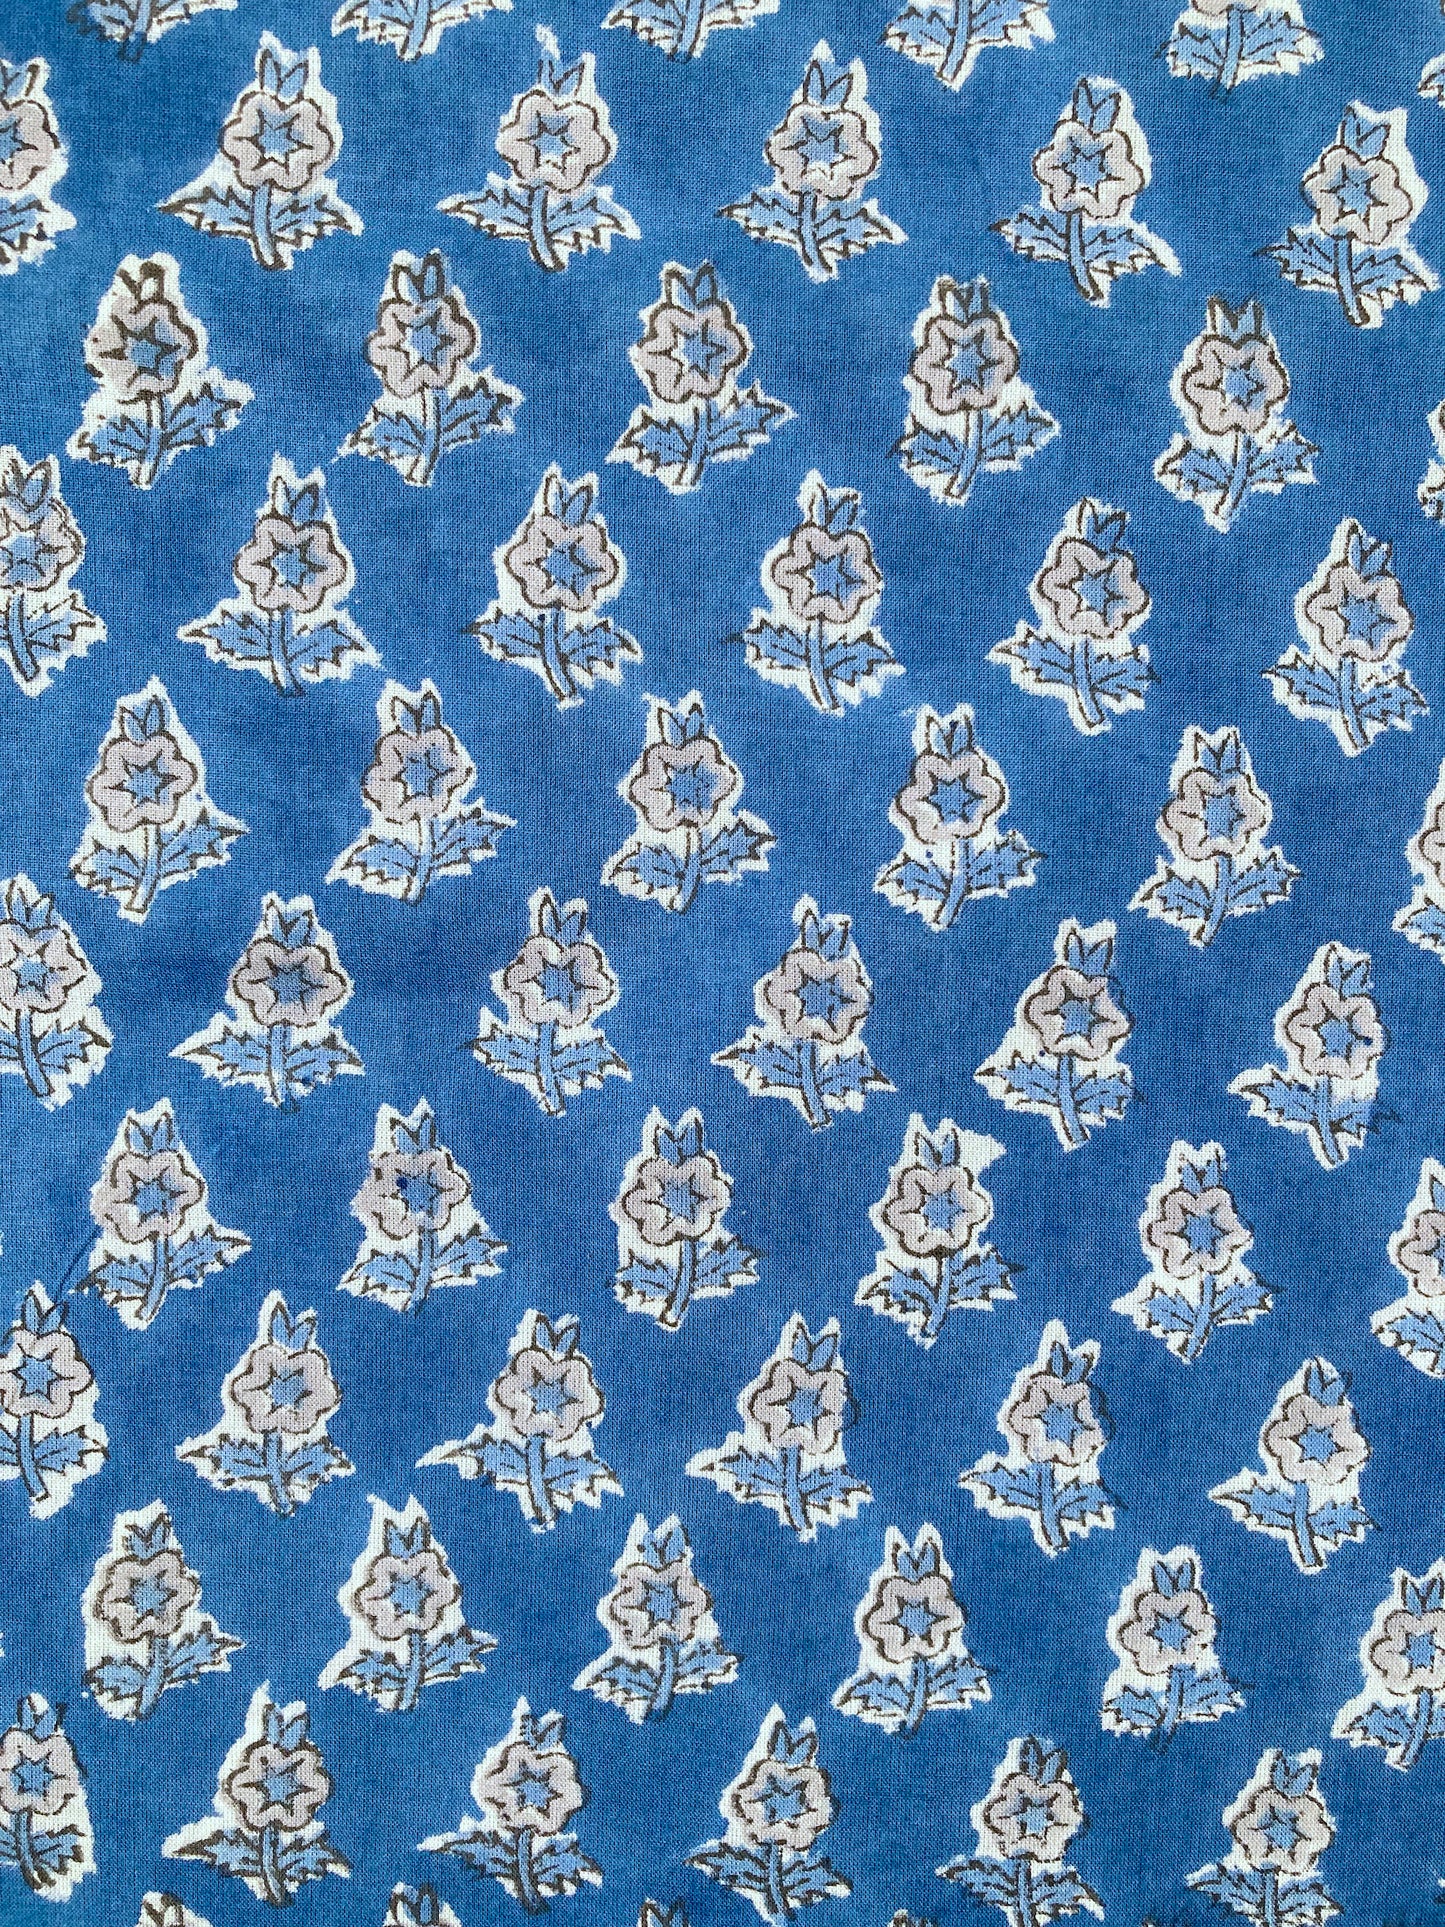 India Hand Block Floral Printed Fabric Blue #207-1